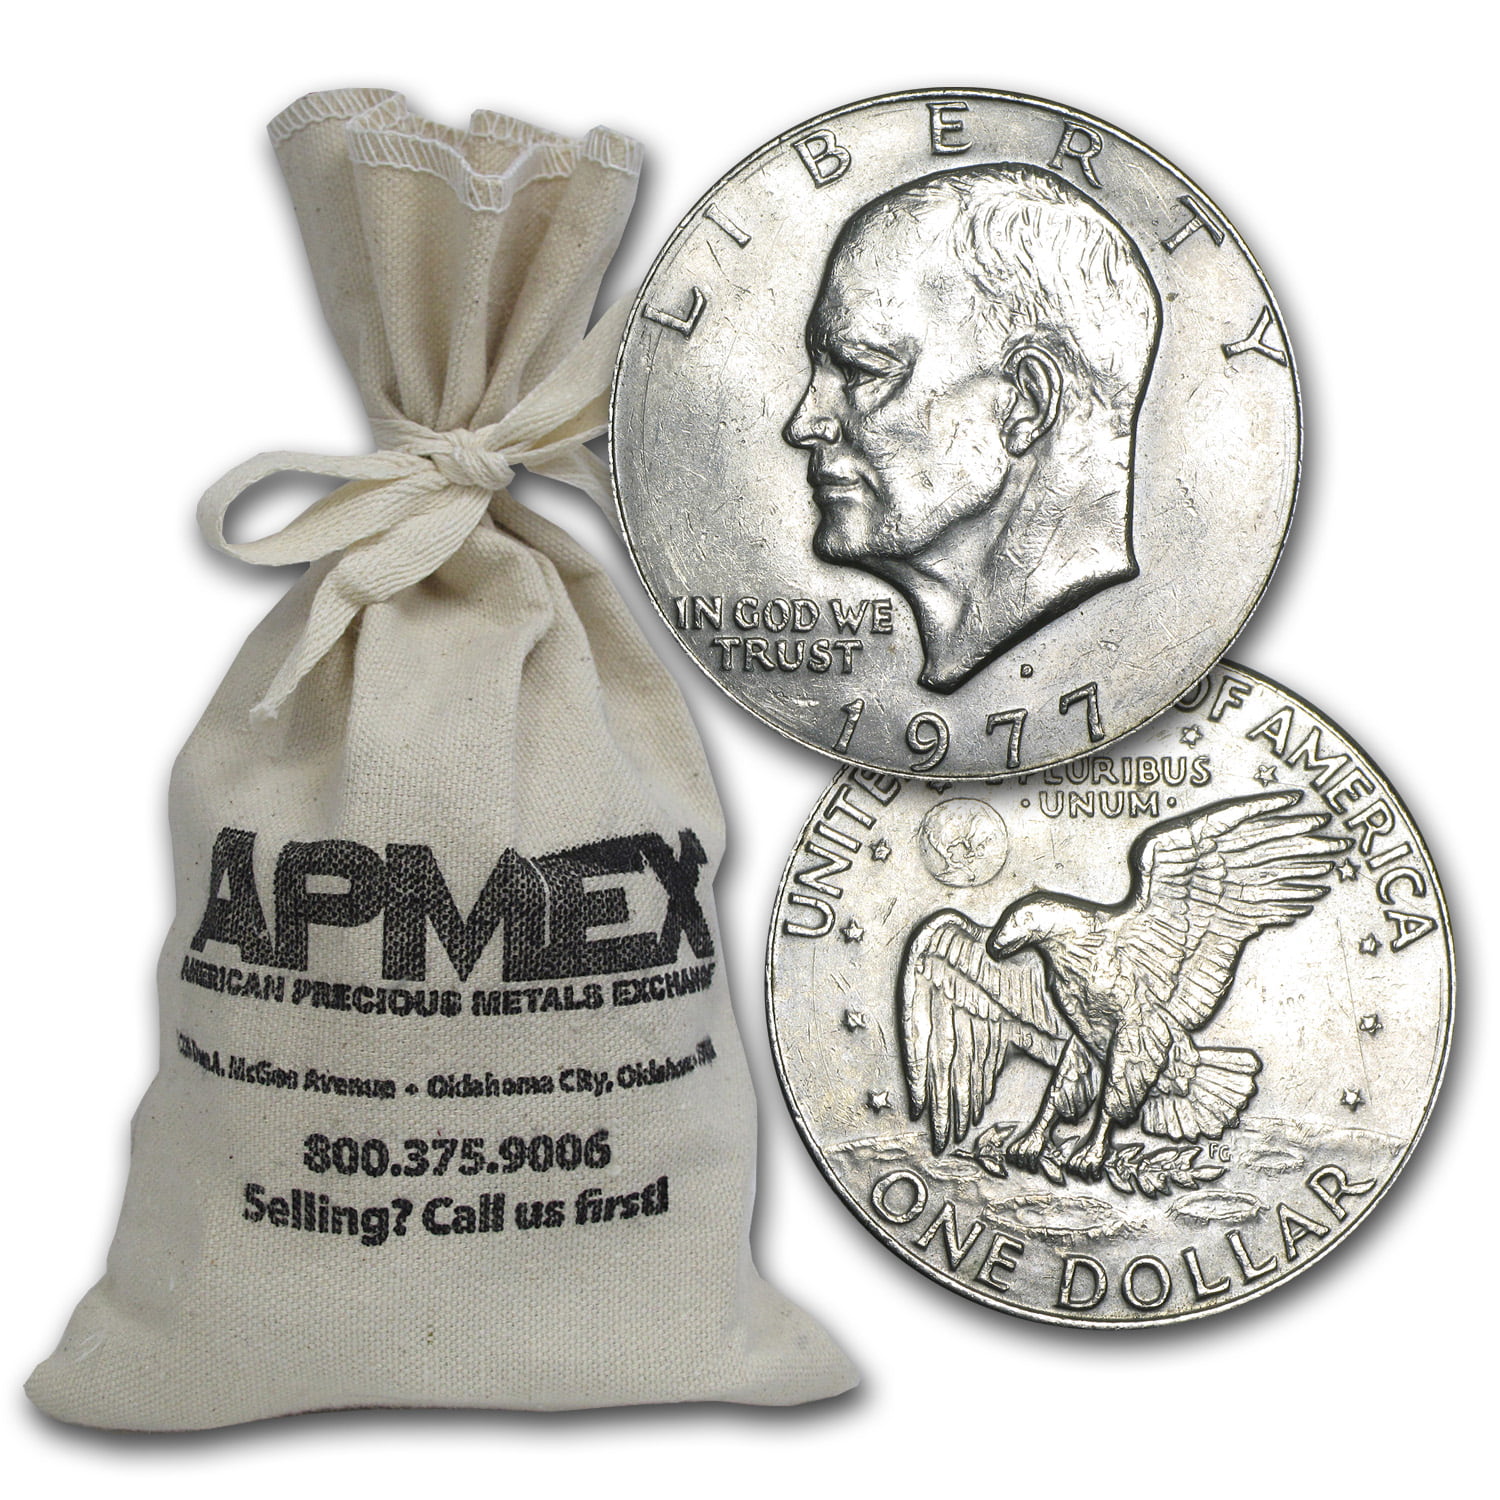 400 COIN WRAPPERS FOR MORGAN PEACE EISENHOWER IKE SILVER DOLLAR COINS PAPER 